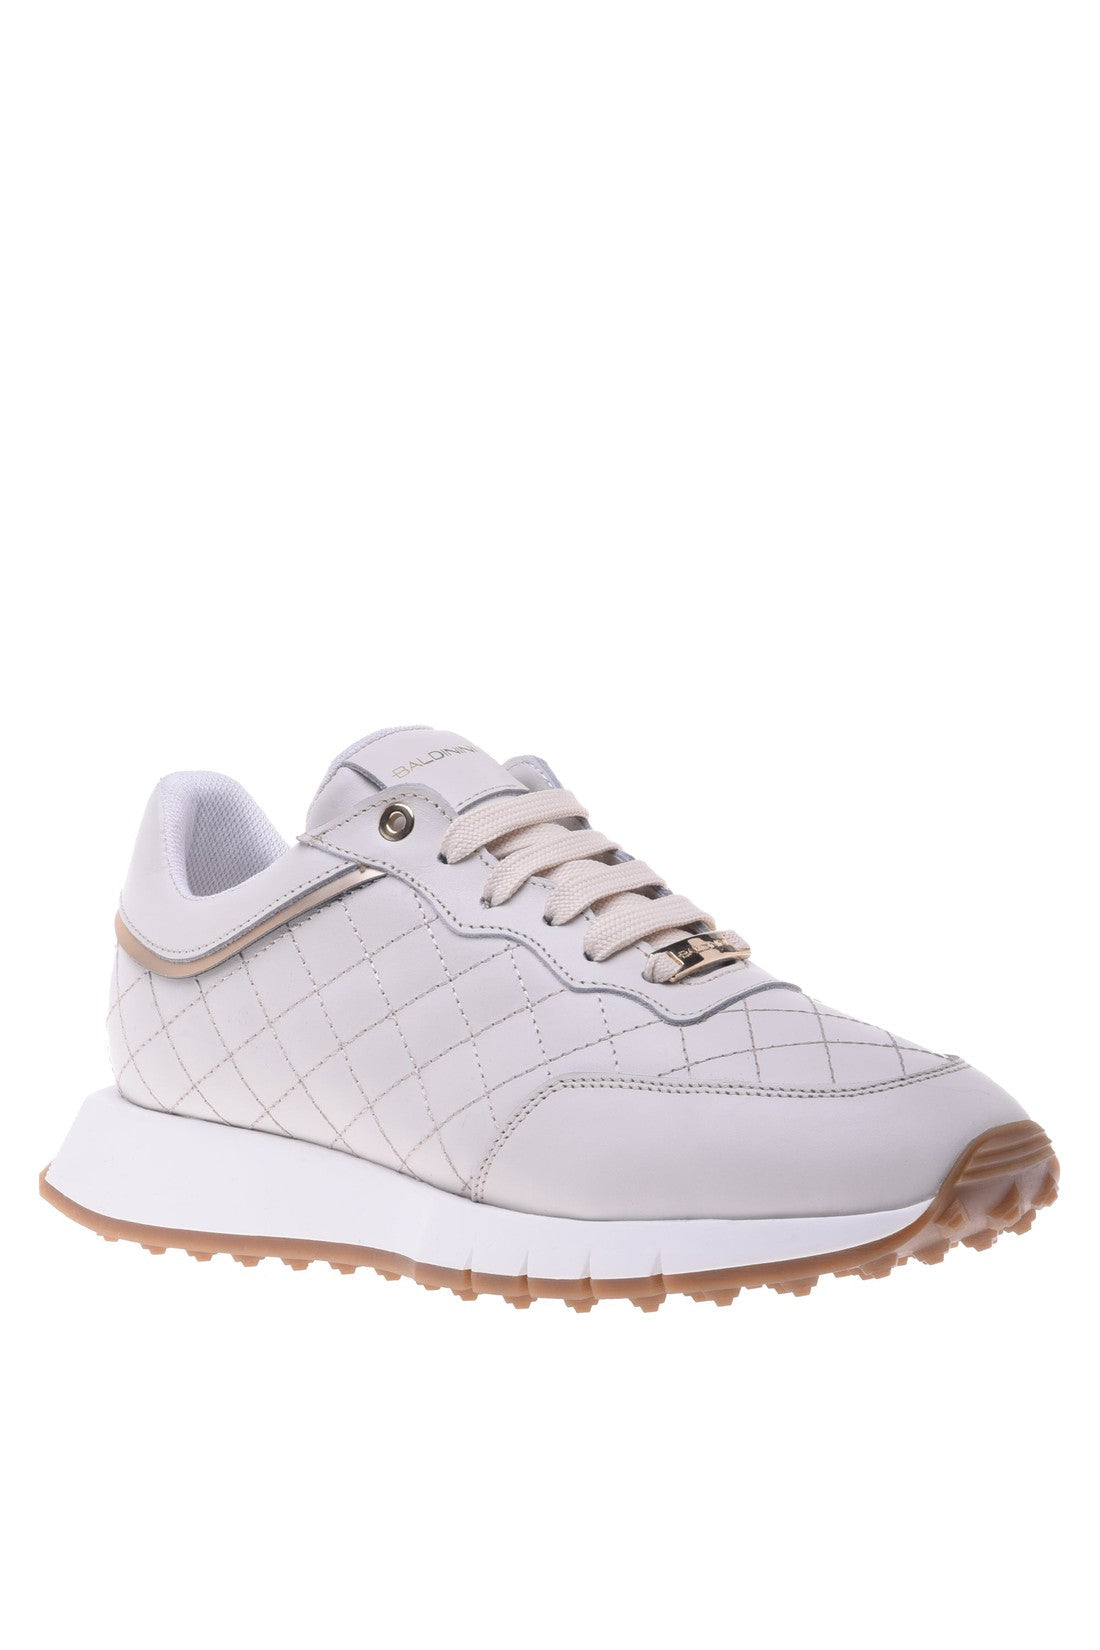 BALDININI-OUTLET-SALE-Sneakers-in-cream-quilted-leather-Sneaker-35-ARCHIVE-COLLECTION.jpg